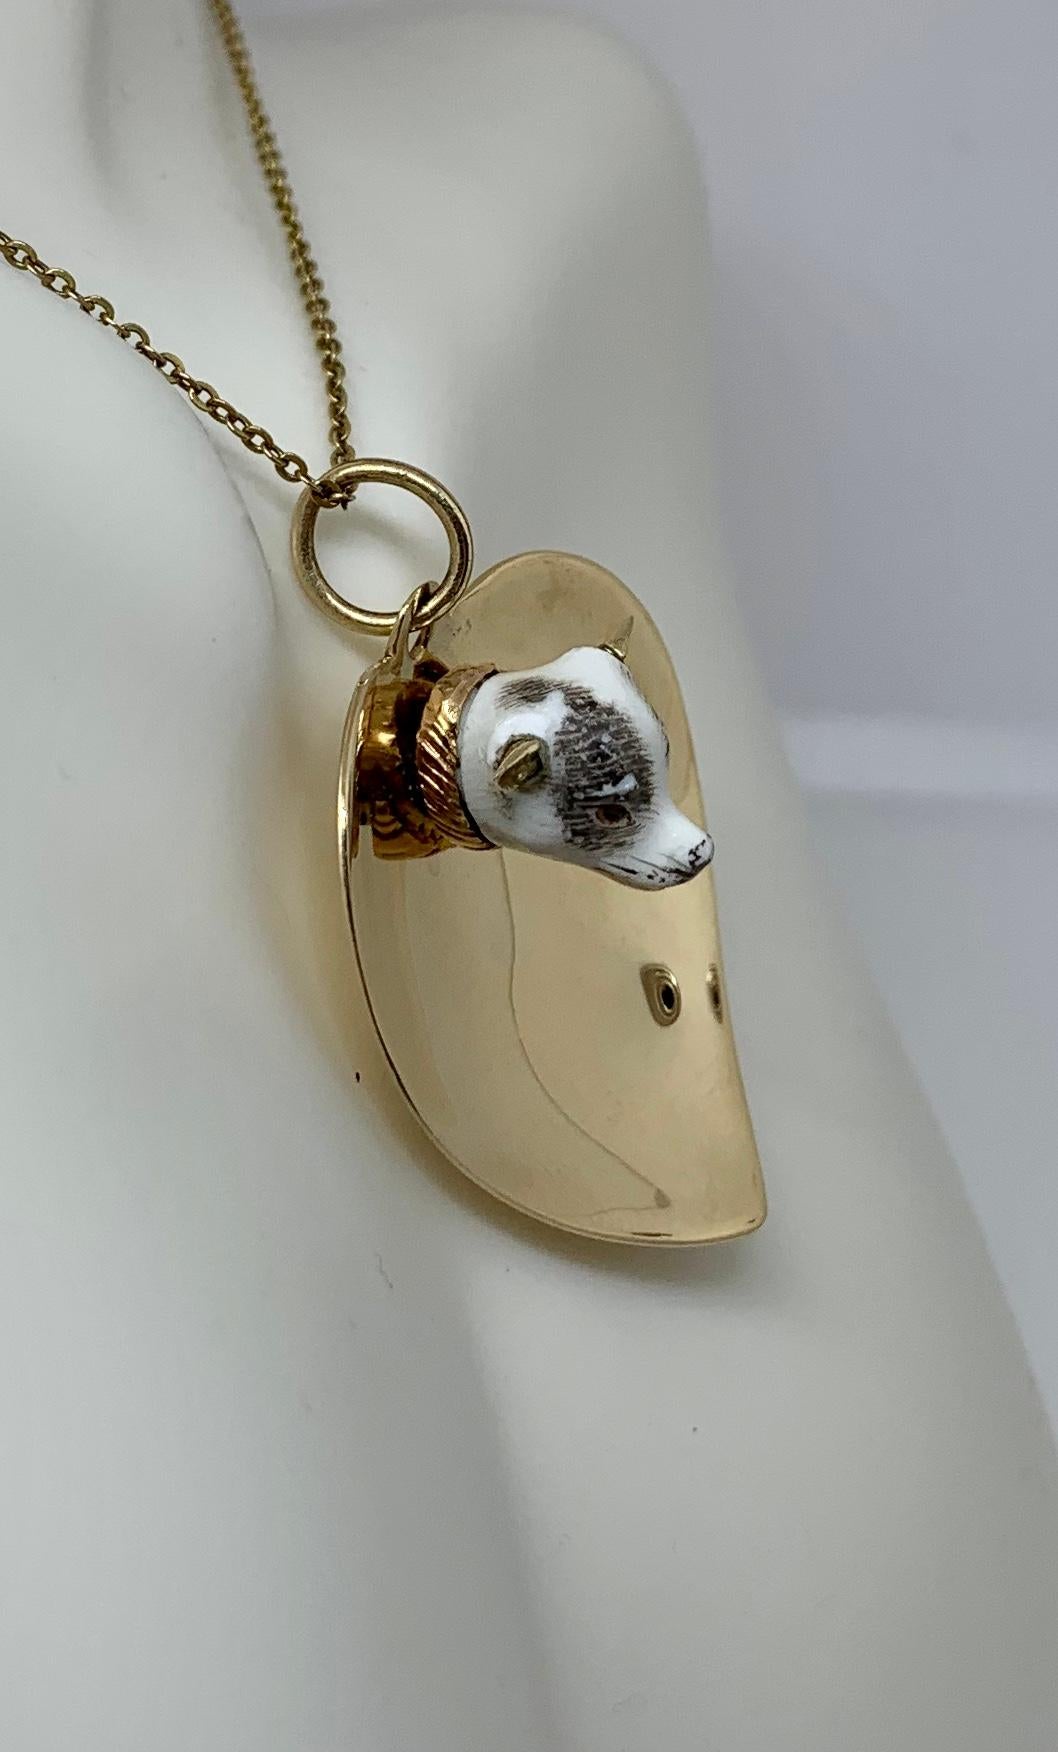 This is a gorgeous and very rare antique Victorian Enamel Dog Heart Pendant.  The extraordinary pendant has a fully modeled face of a dog set on a scalloped heart pendant in 14 Karat Gold.   The face of the dog is absolutely charming and it is so